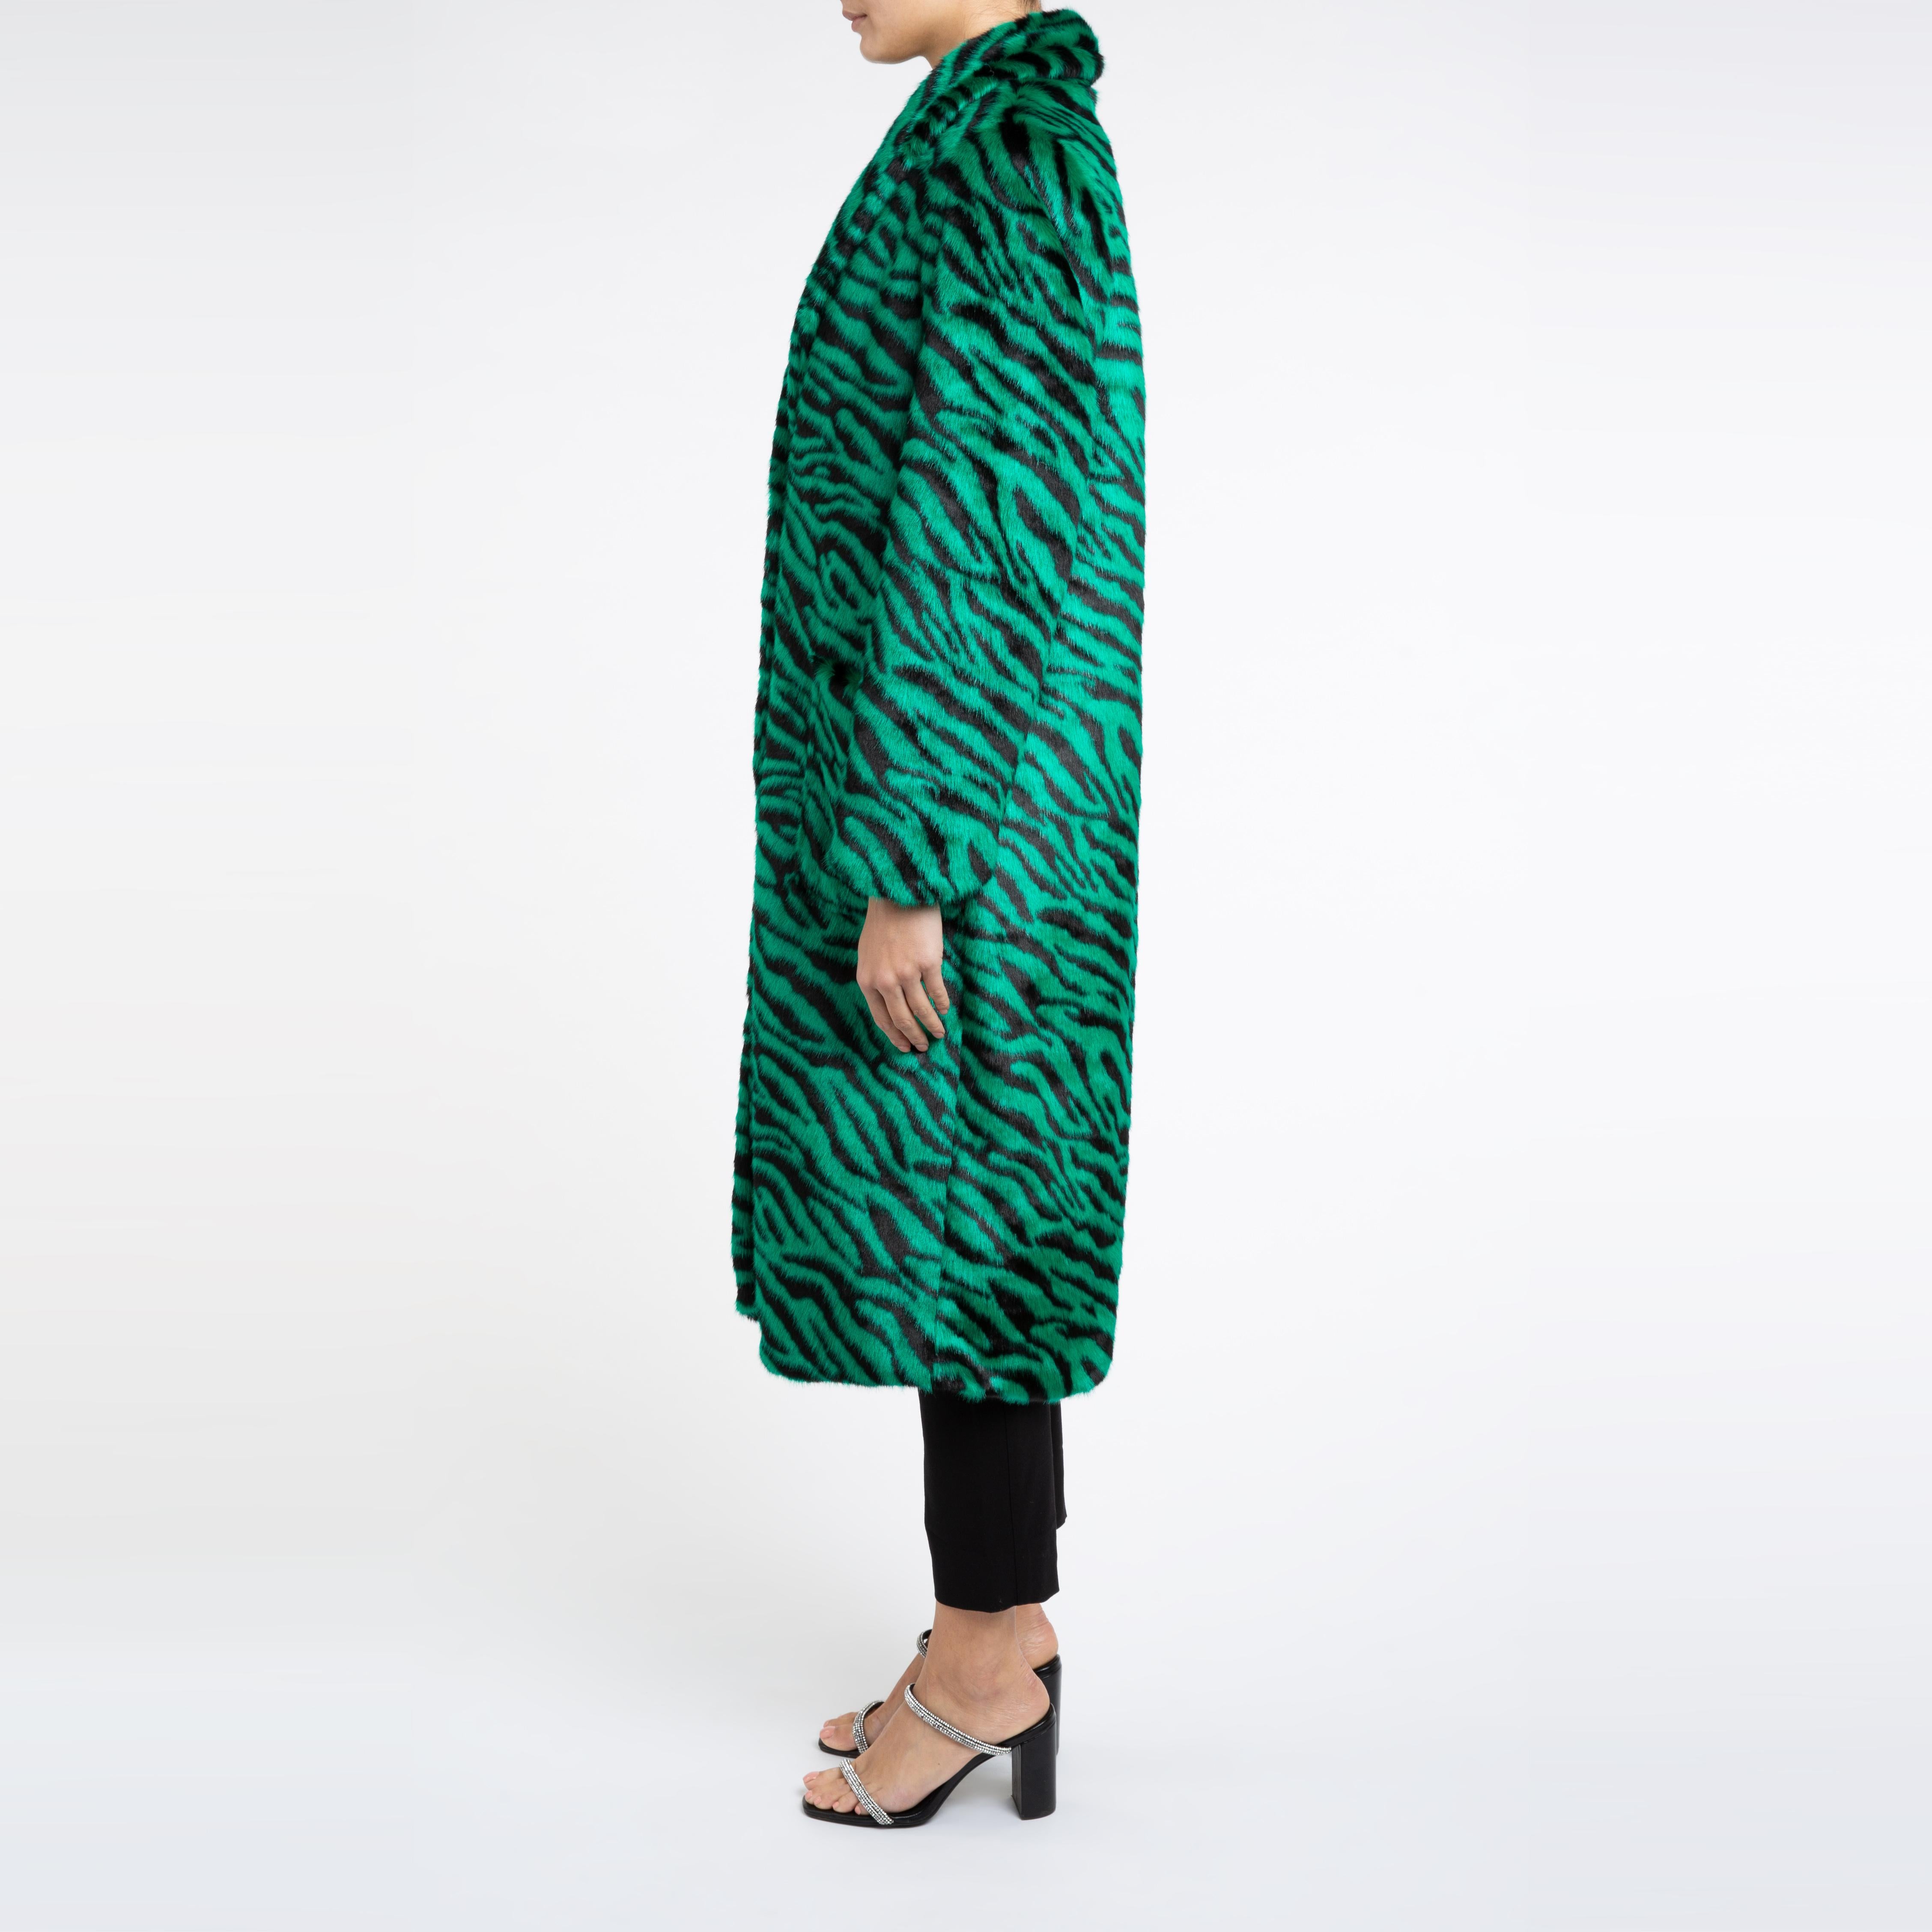 Esmeralda Faux Fur Coat in Emerald Green Zebra Print size uk 14

A coat for dressing up and down with jeans or a dress and to keep you cosy for the cold weather. 
This longline design is flattering and easy to wear with jumpers etc with its relaxed